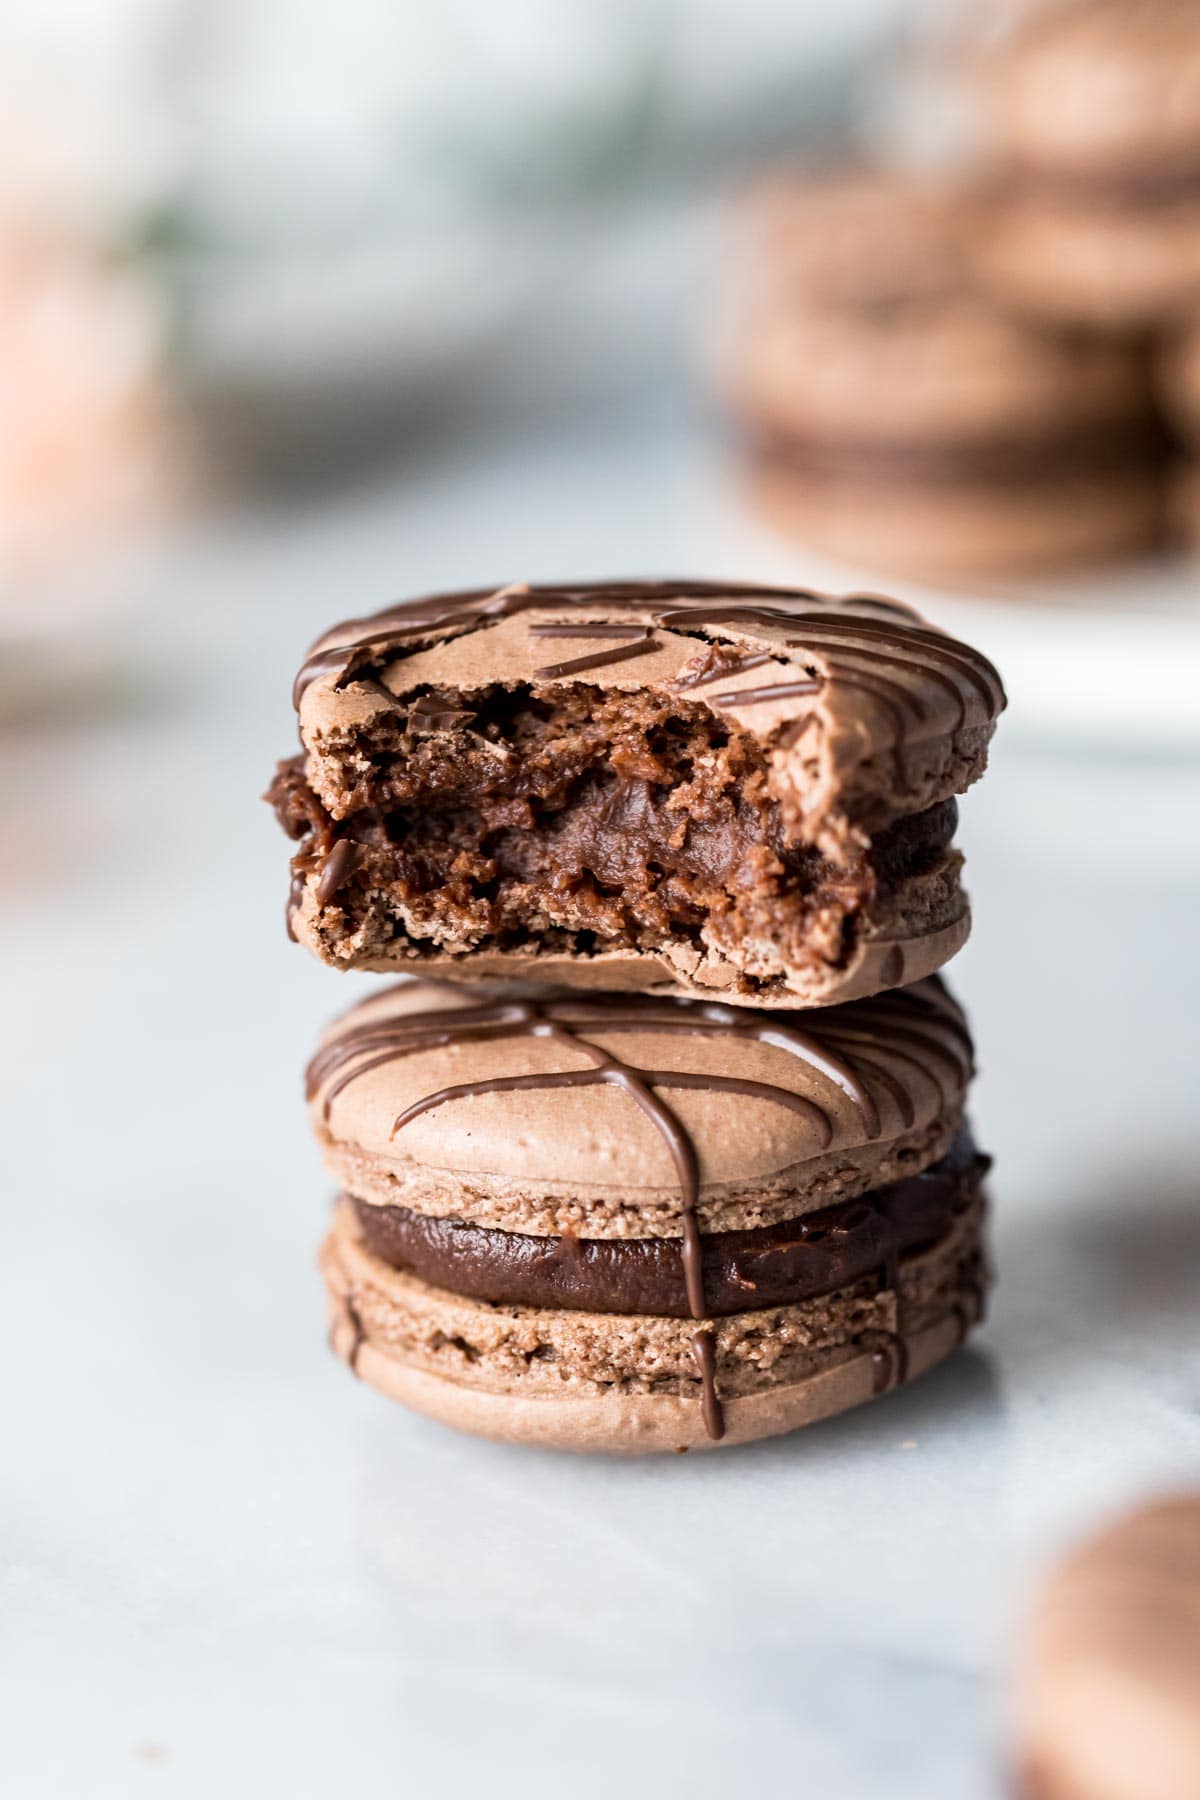 Two chocolate macarons stacked on top of each other with the top macaron missing a bite.